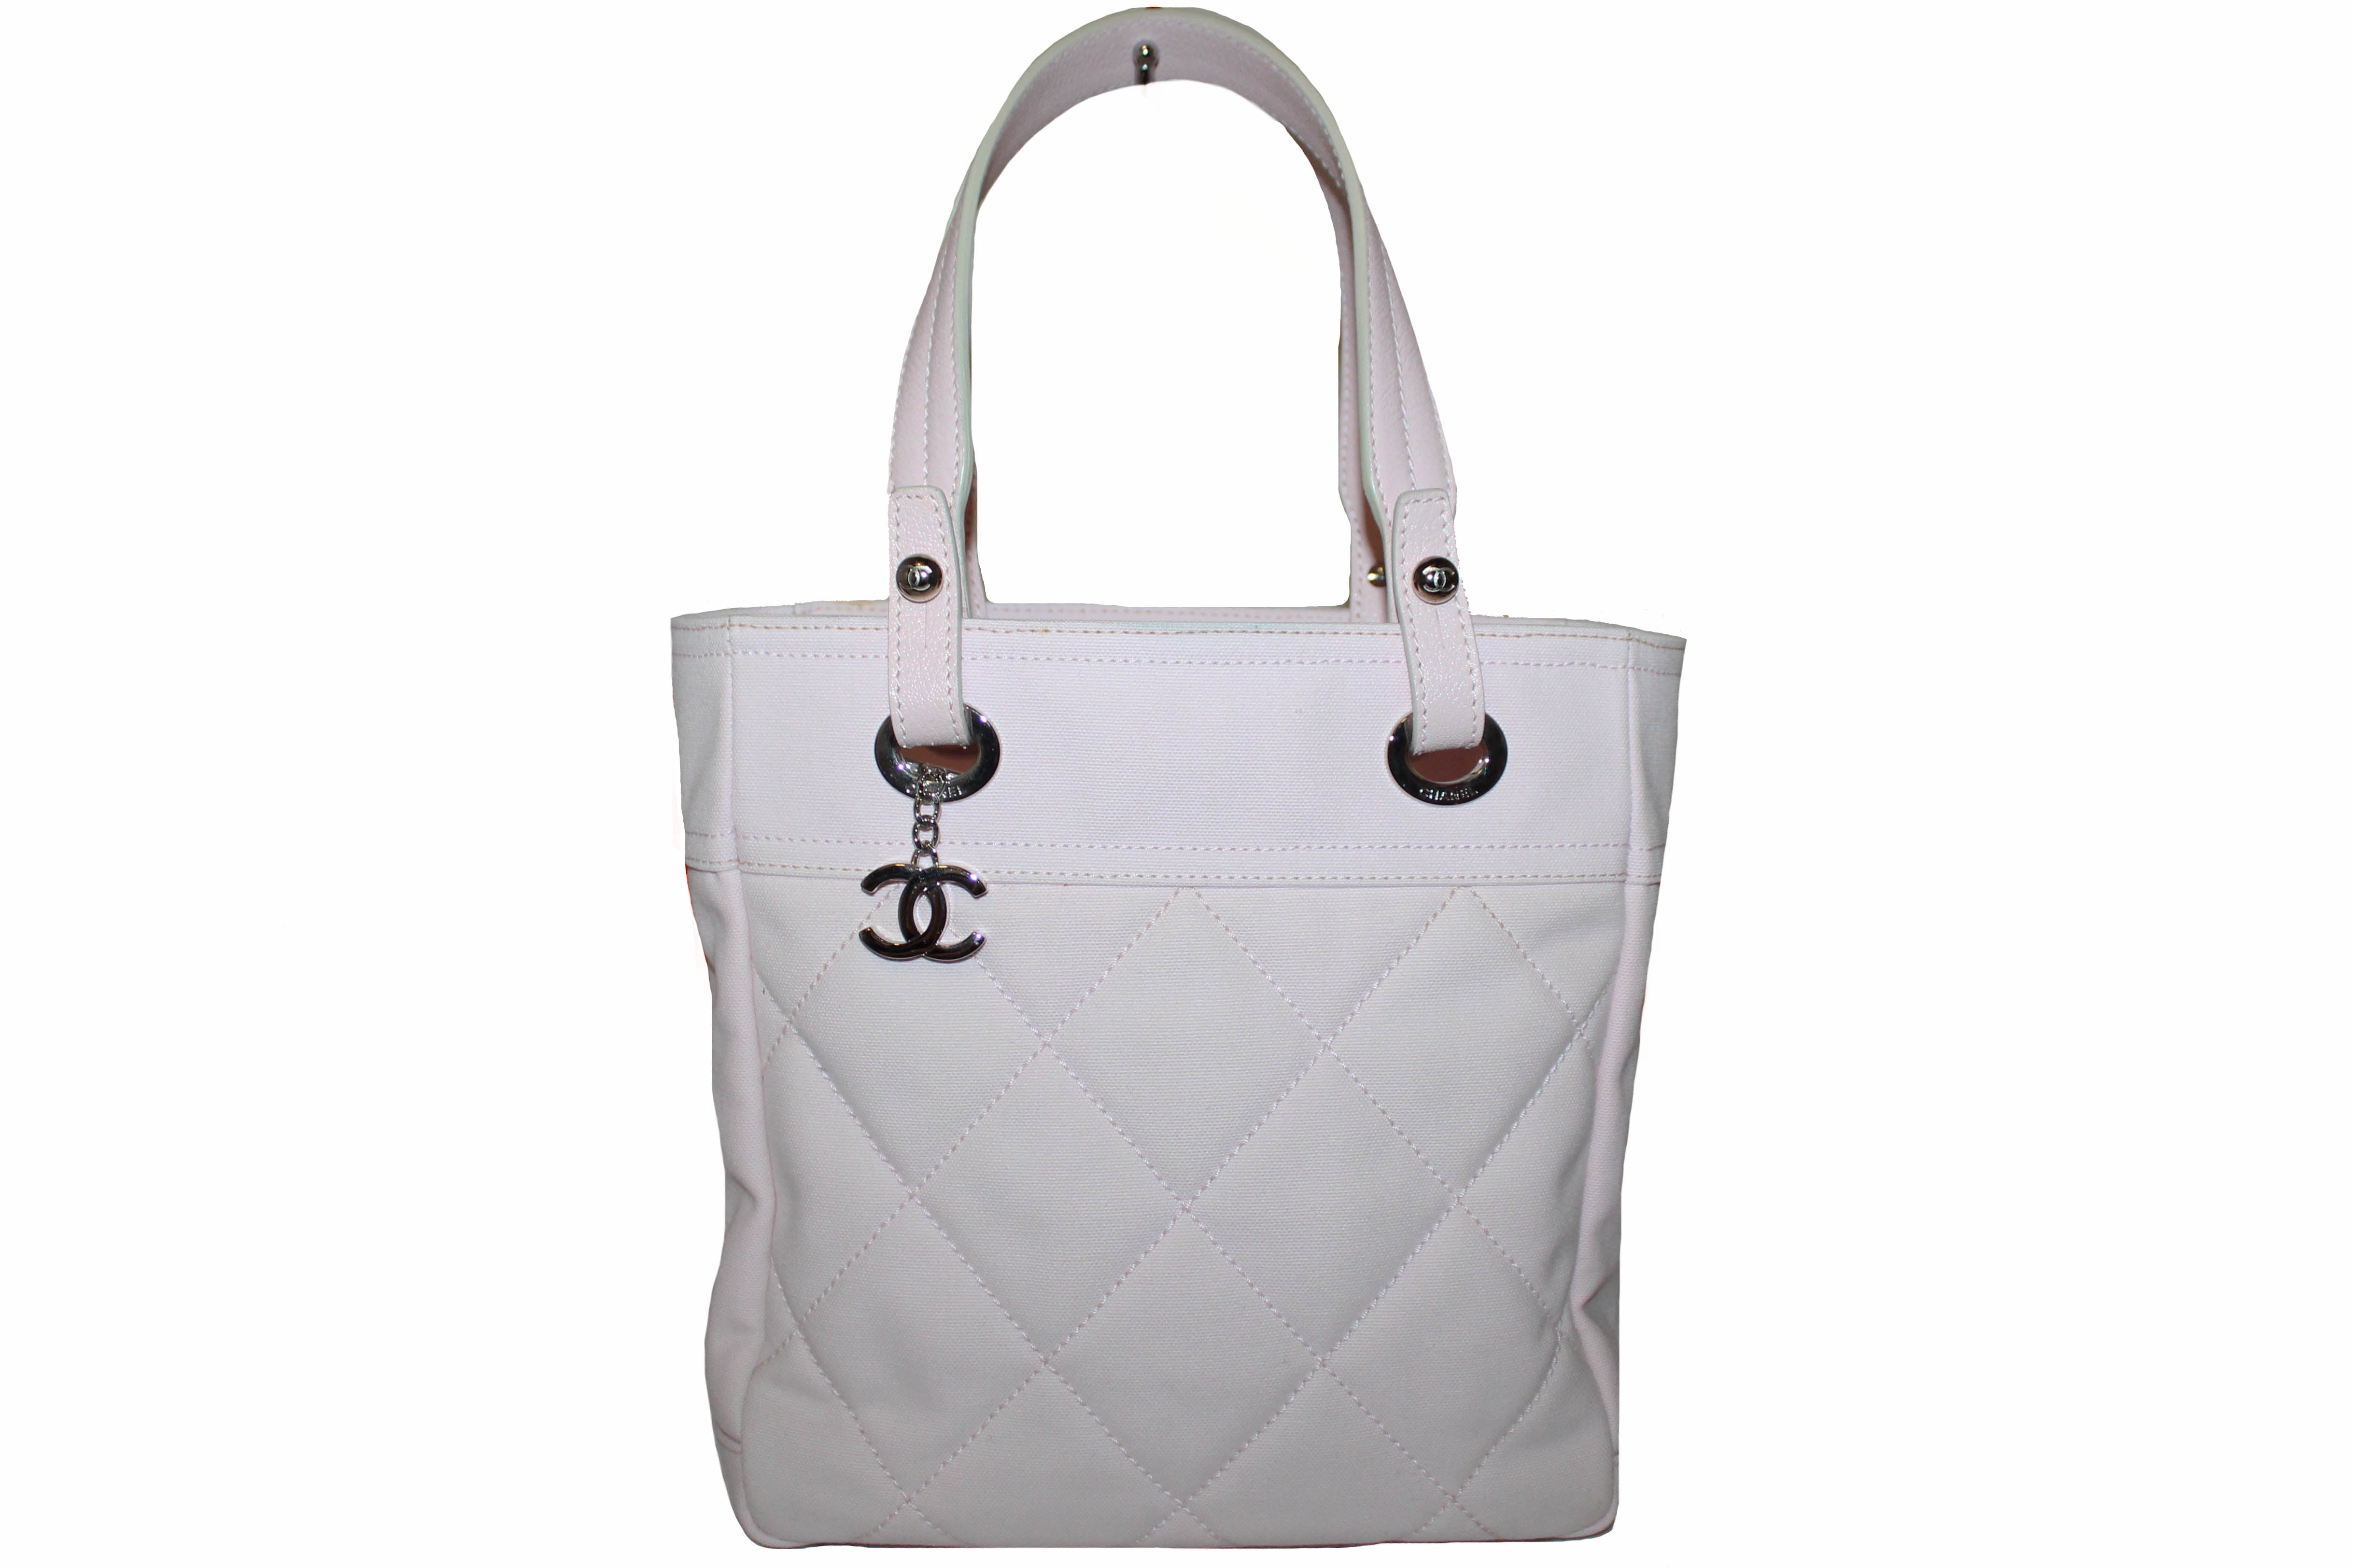 Chanel Paris Biarritz Coated Canvas Leather Tote Bag